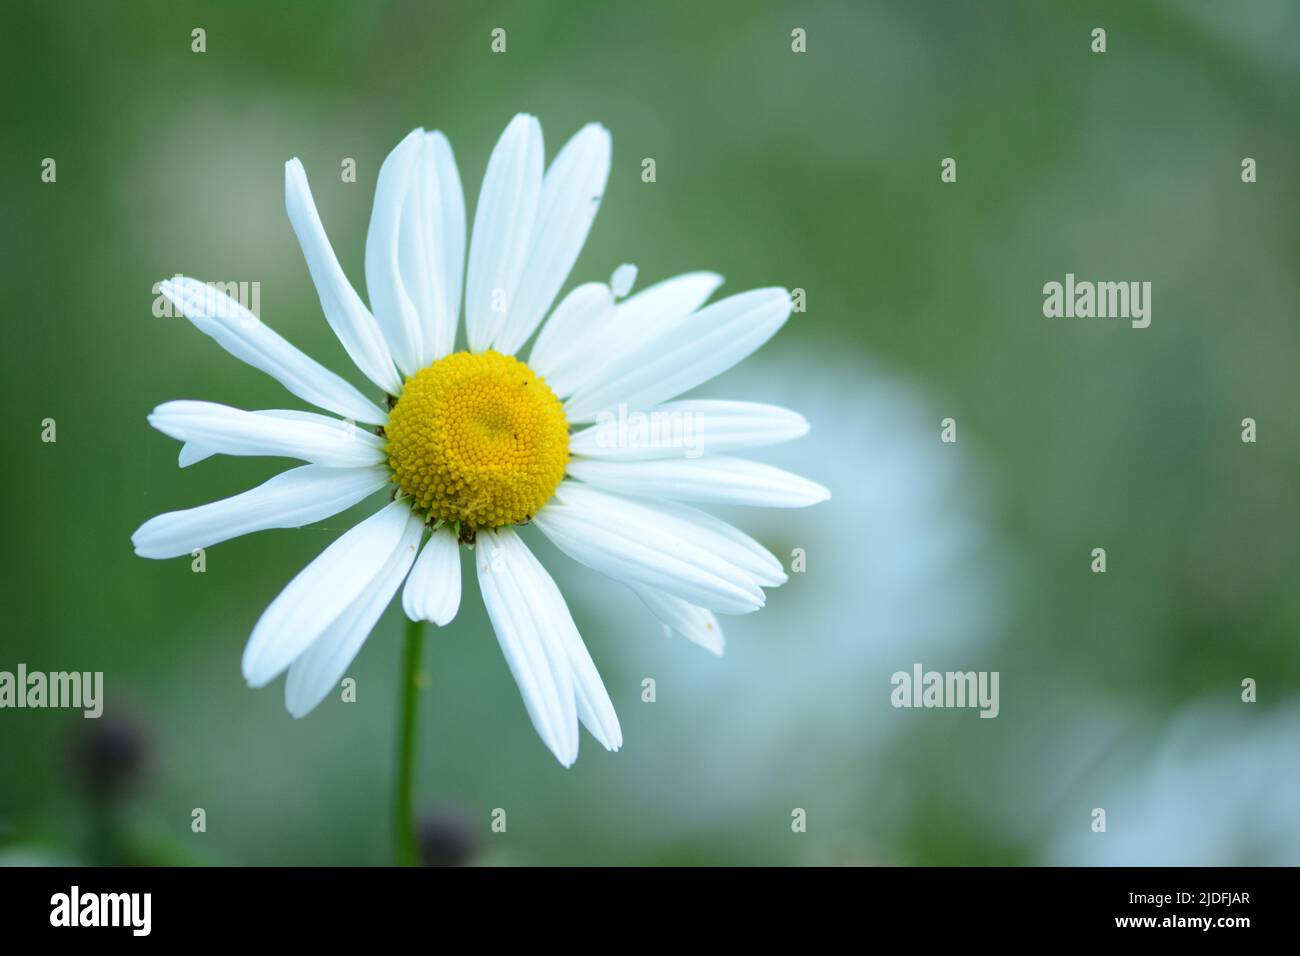 Closeup of white daisy in shade, irregular shape petals, soft focus natural green background, white flower with yellow centre Stock Photo